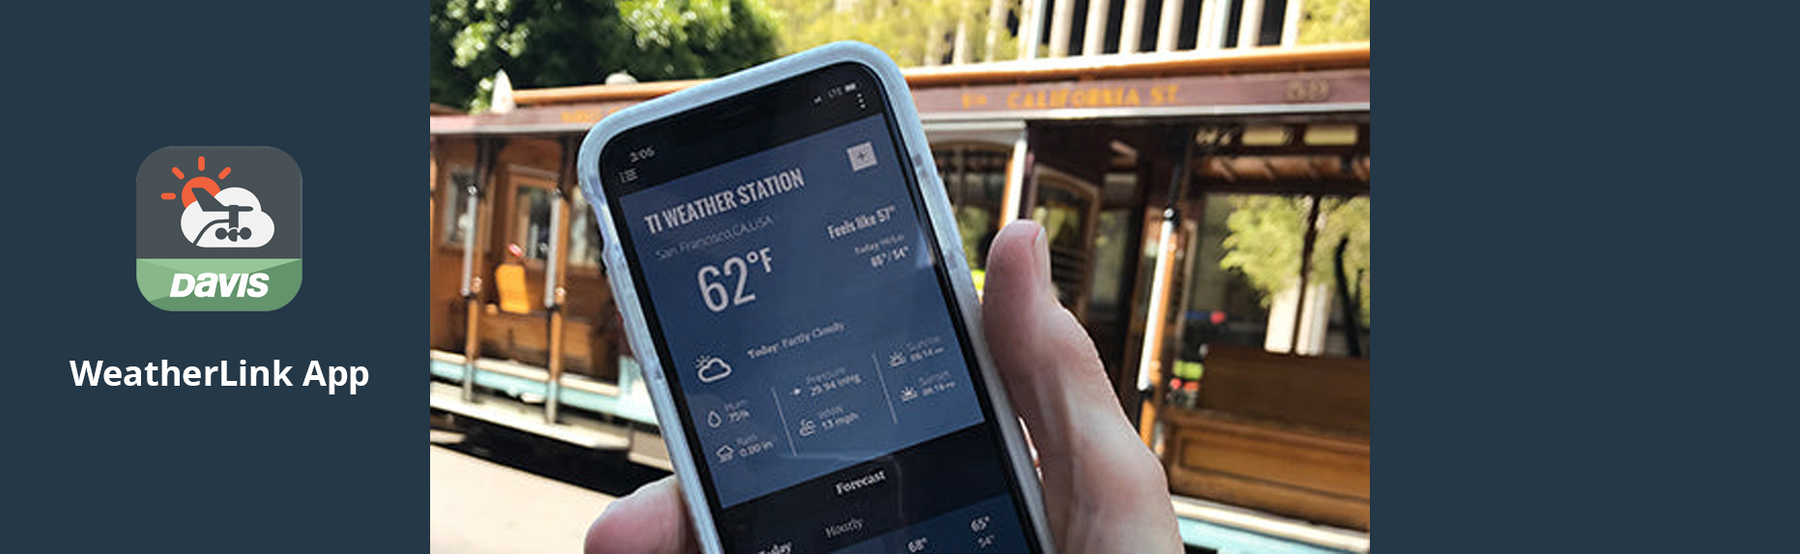 Top 5 Reasons to Download the WeatherLink Mobile App